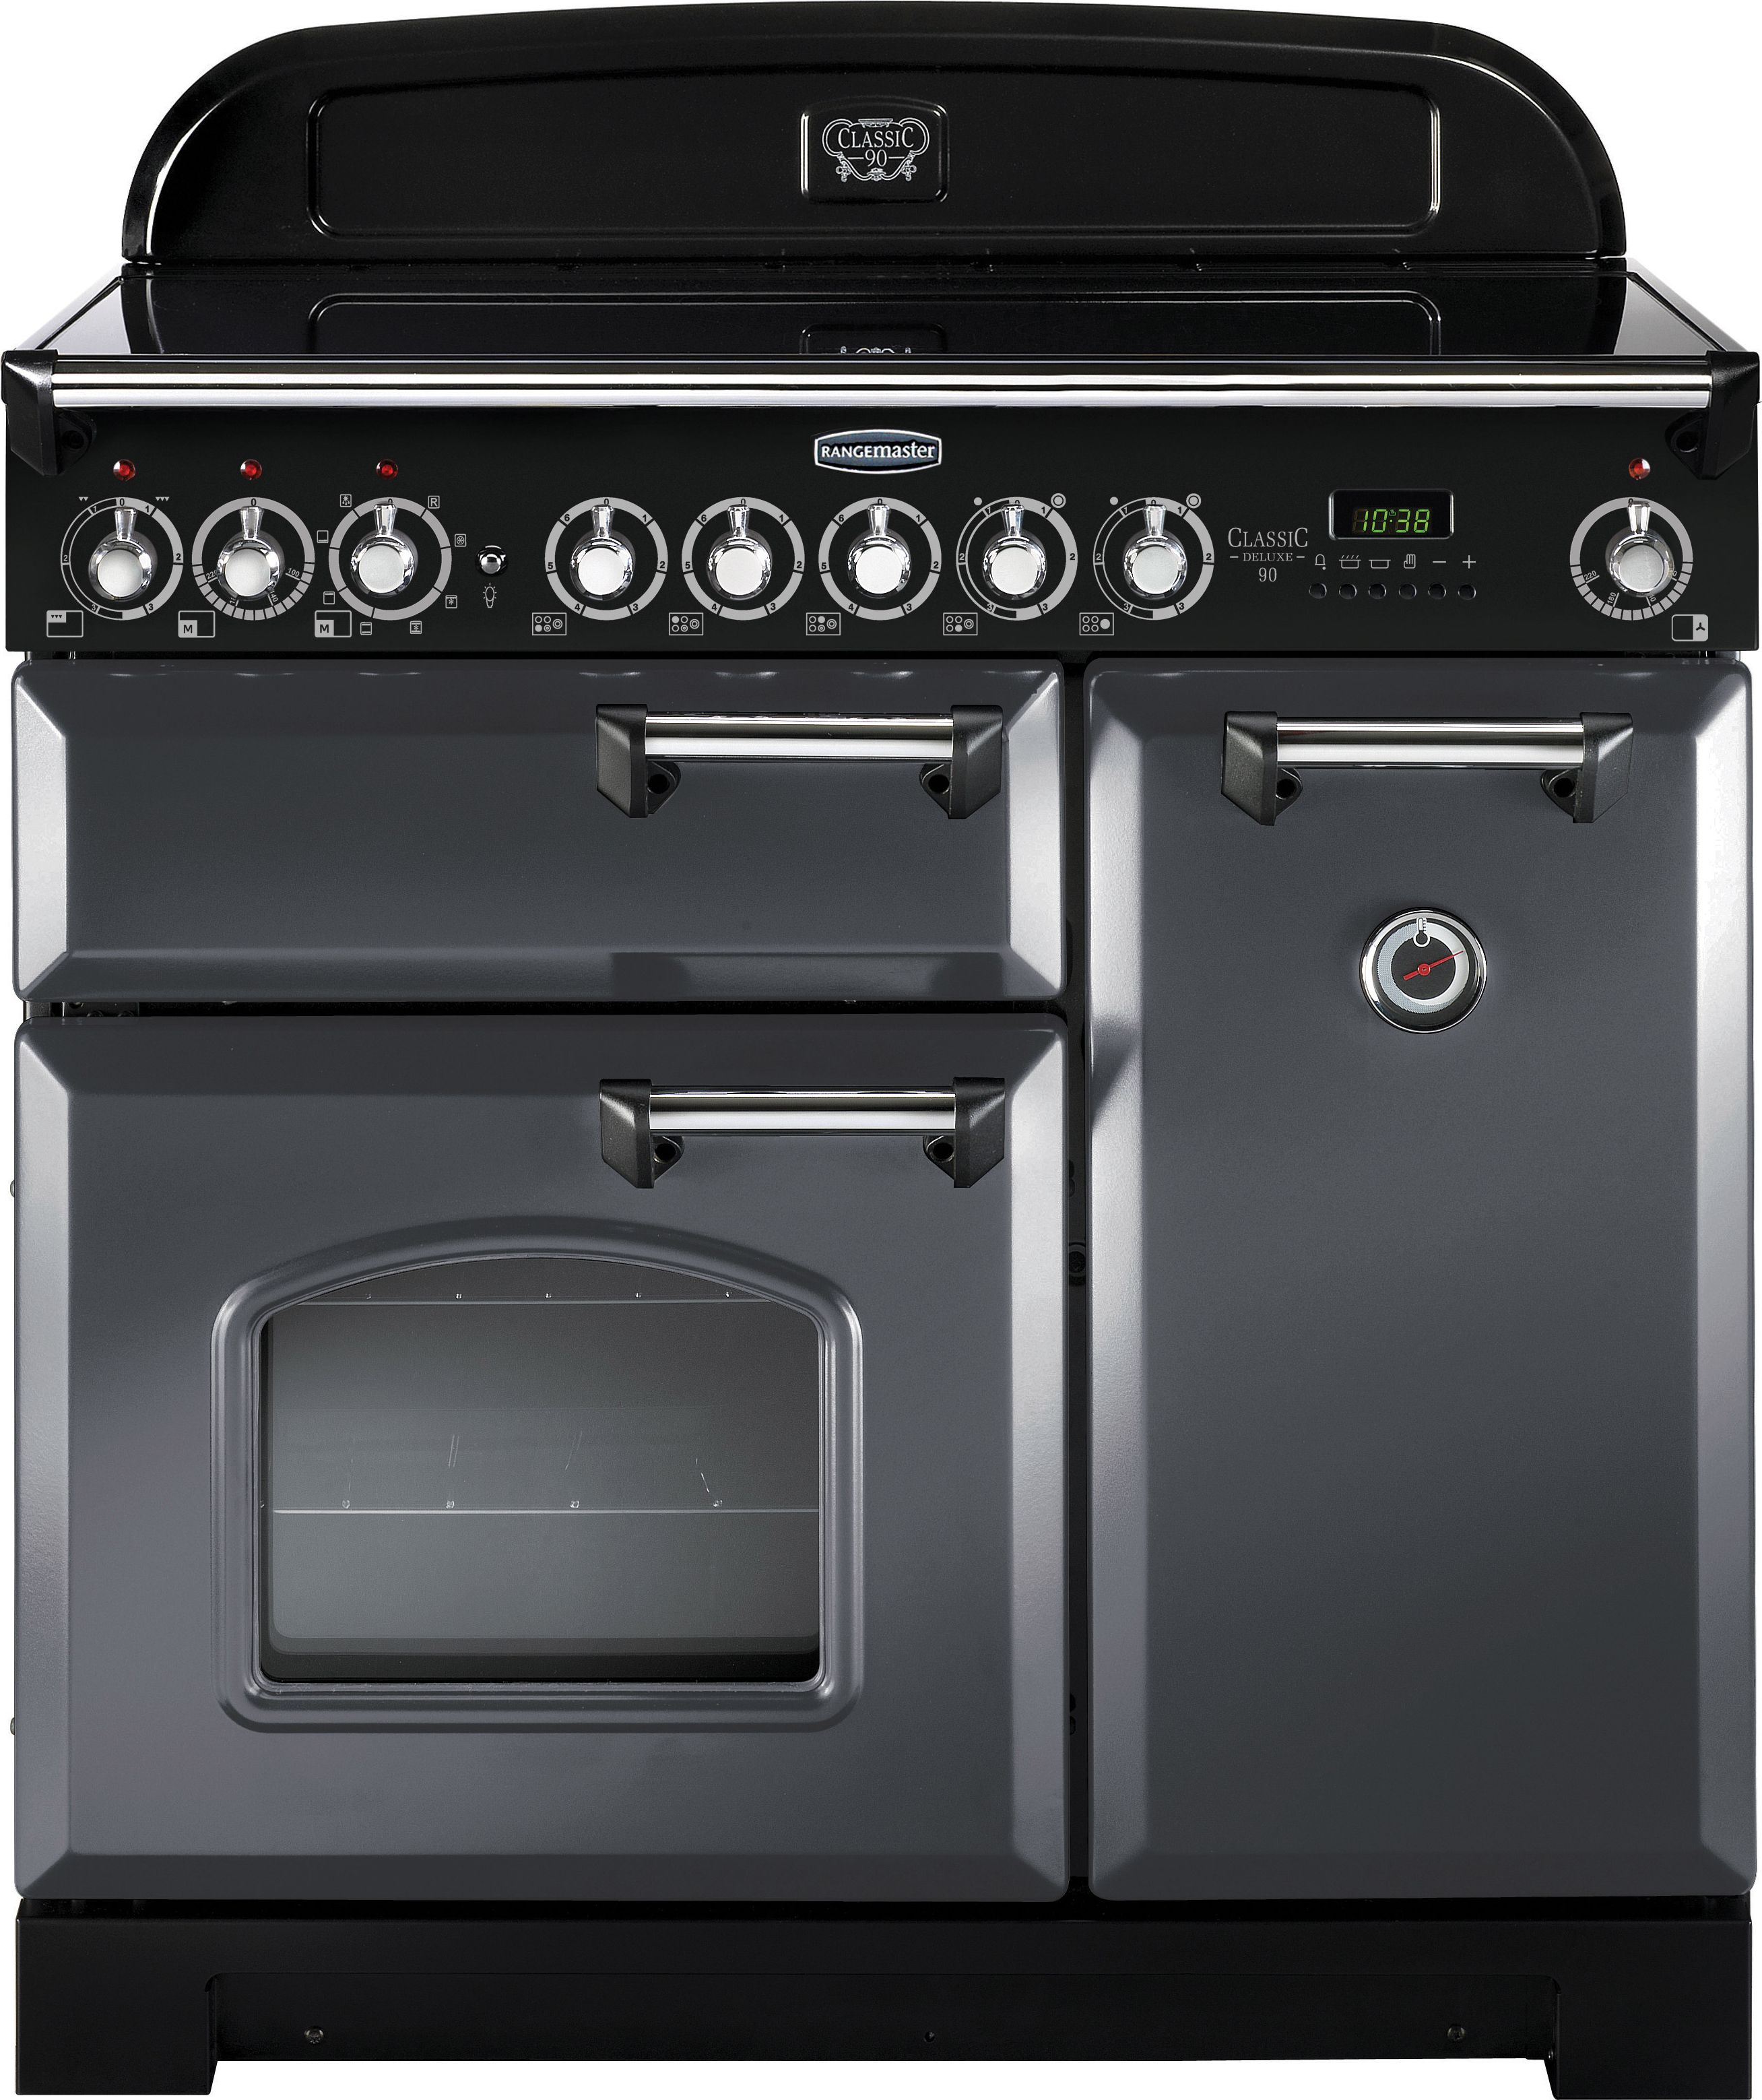 Rangemaster Classic Deluxe CDL90ECSL/C 90cm Electric Range Cooker with Ceramic Hob - Slate Grey / Chrome - A/A Rated, Grey